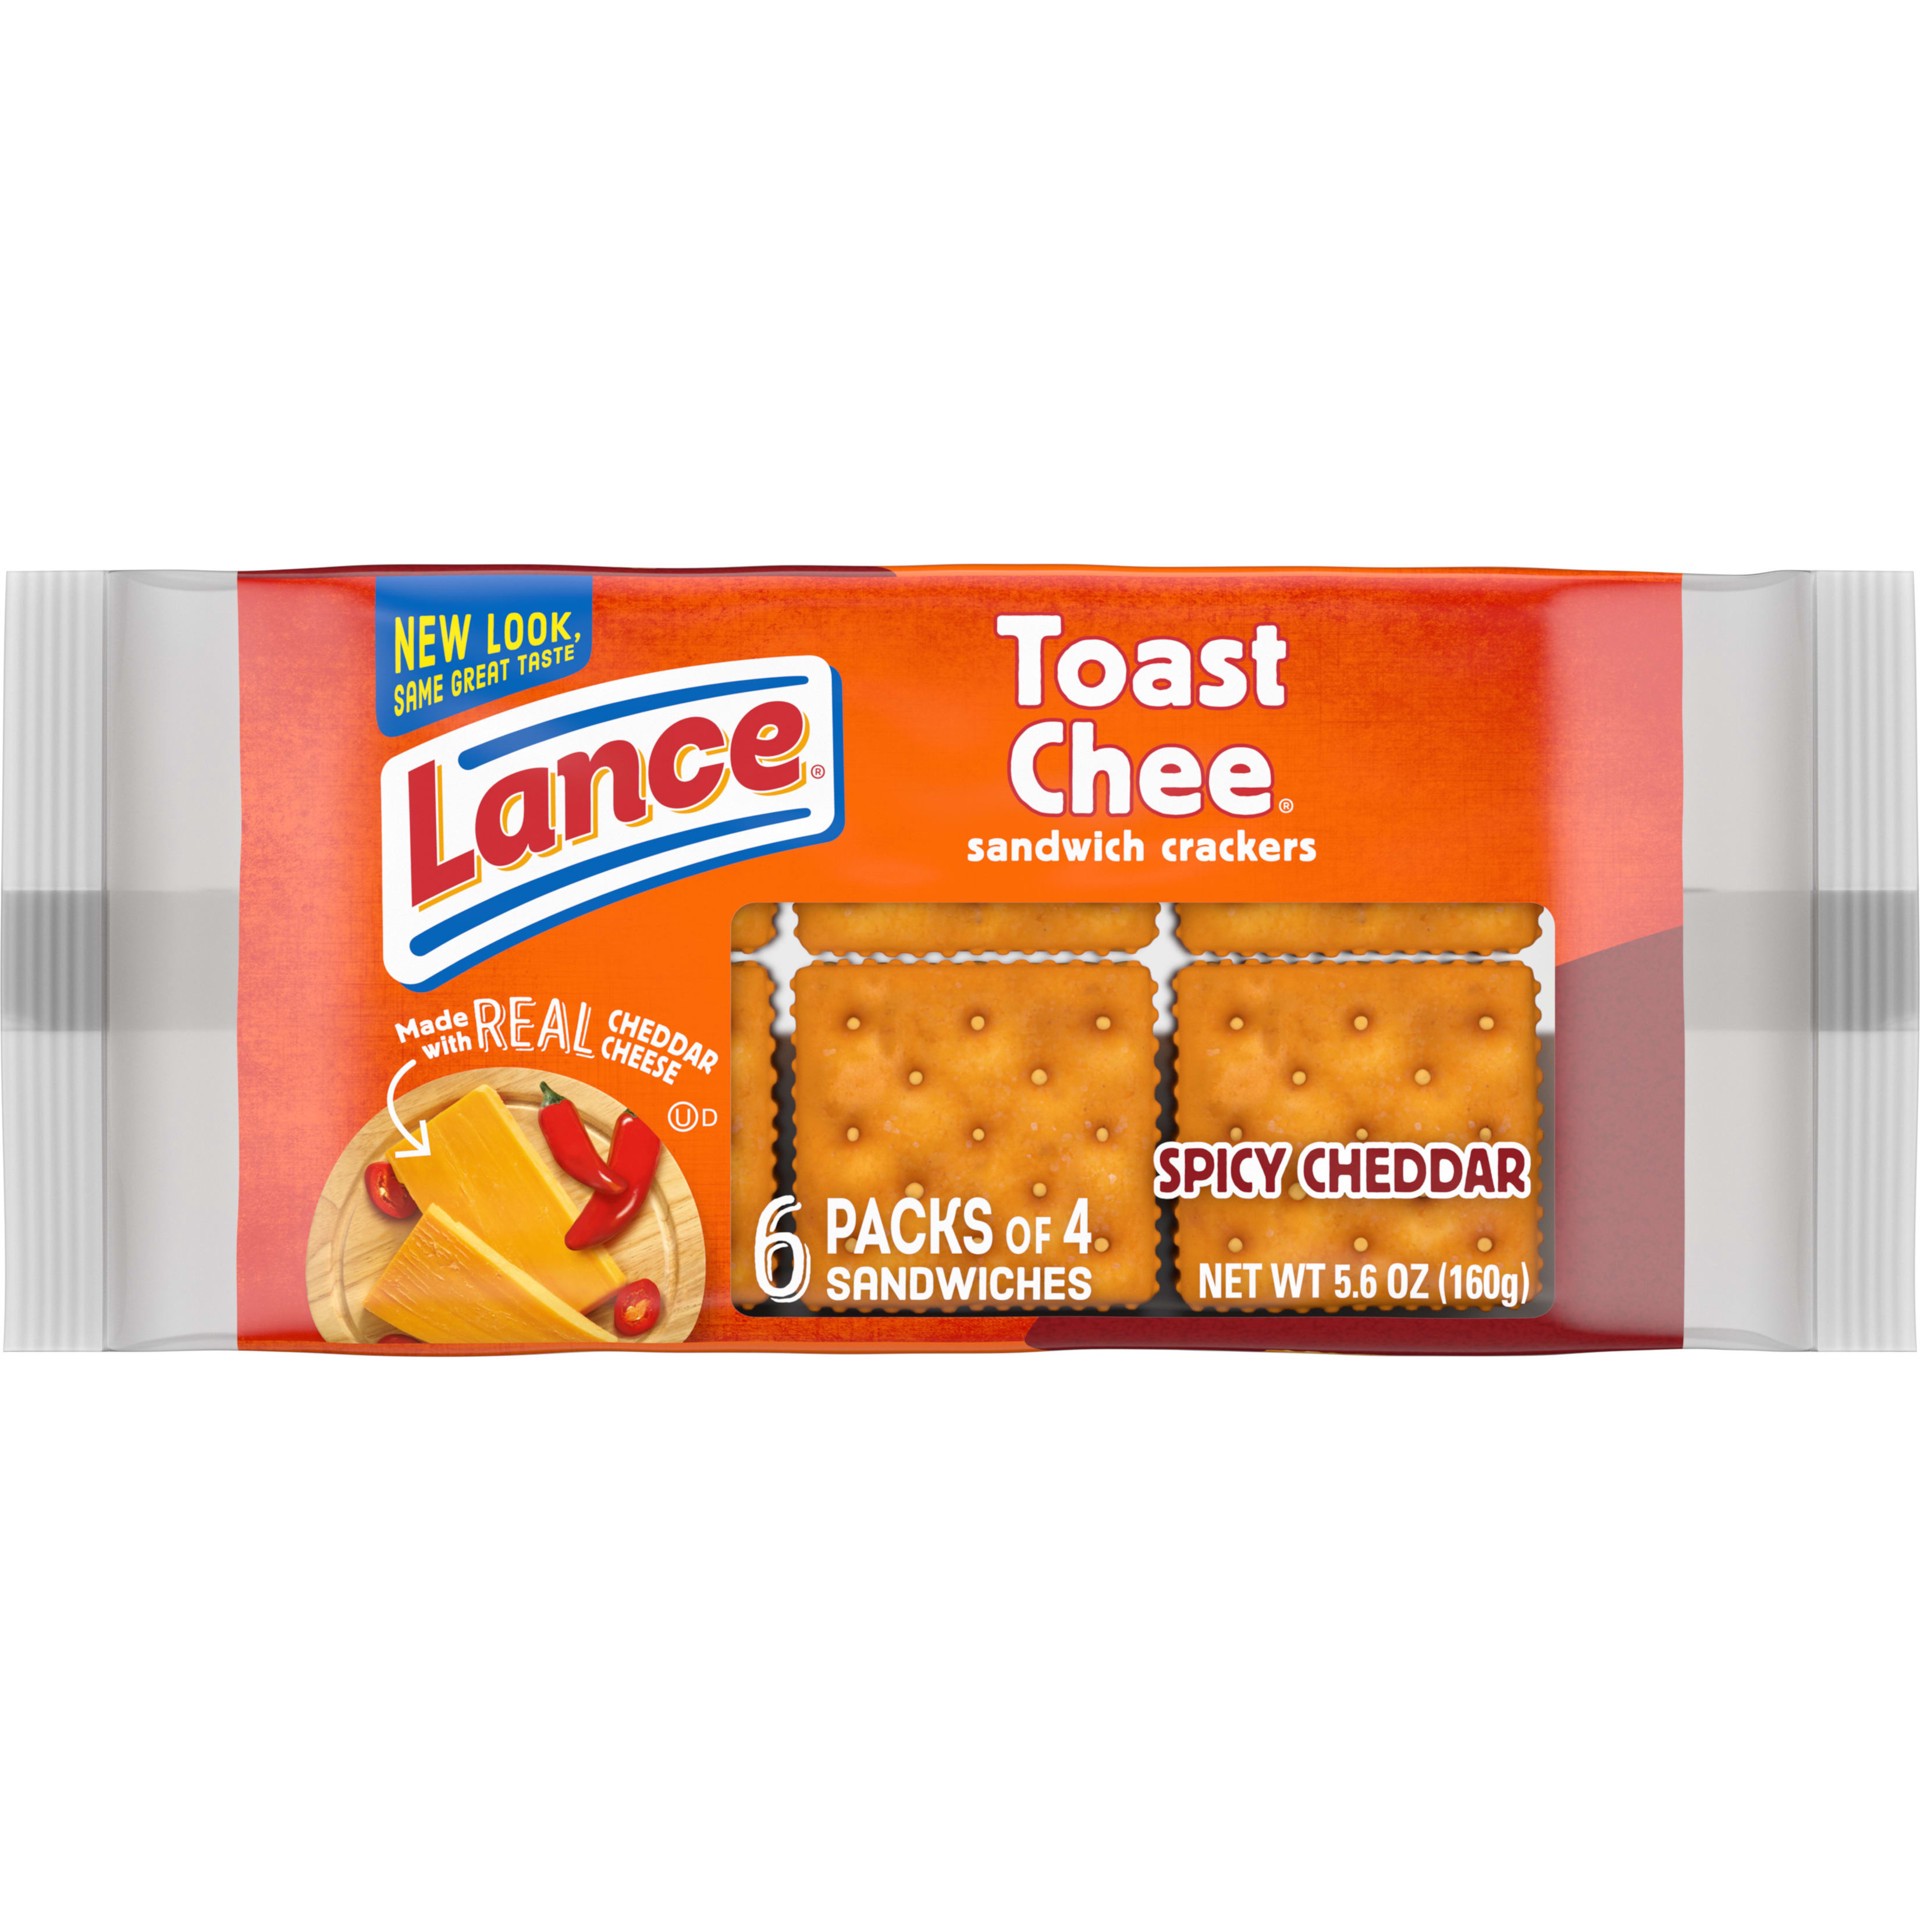 slide 1 of 10, Lance Sandwich Crackers, ToastChee Spicy Cheddar, 6 On-the-Go Packs, 4 Sandwiches Each, 5.6 oz